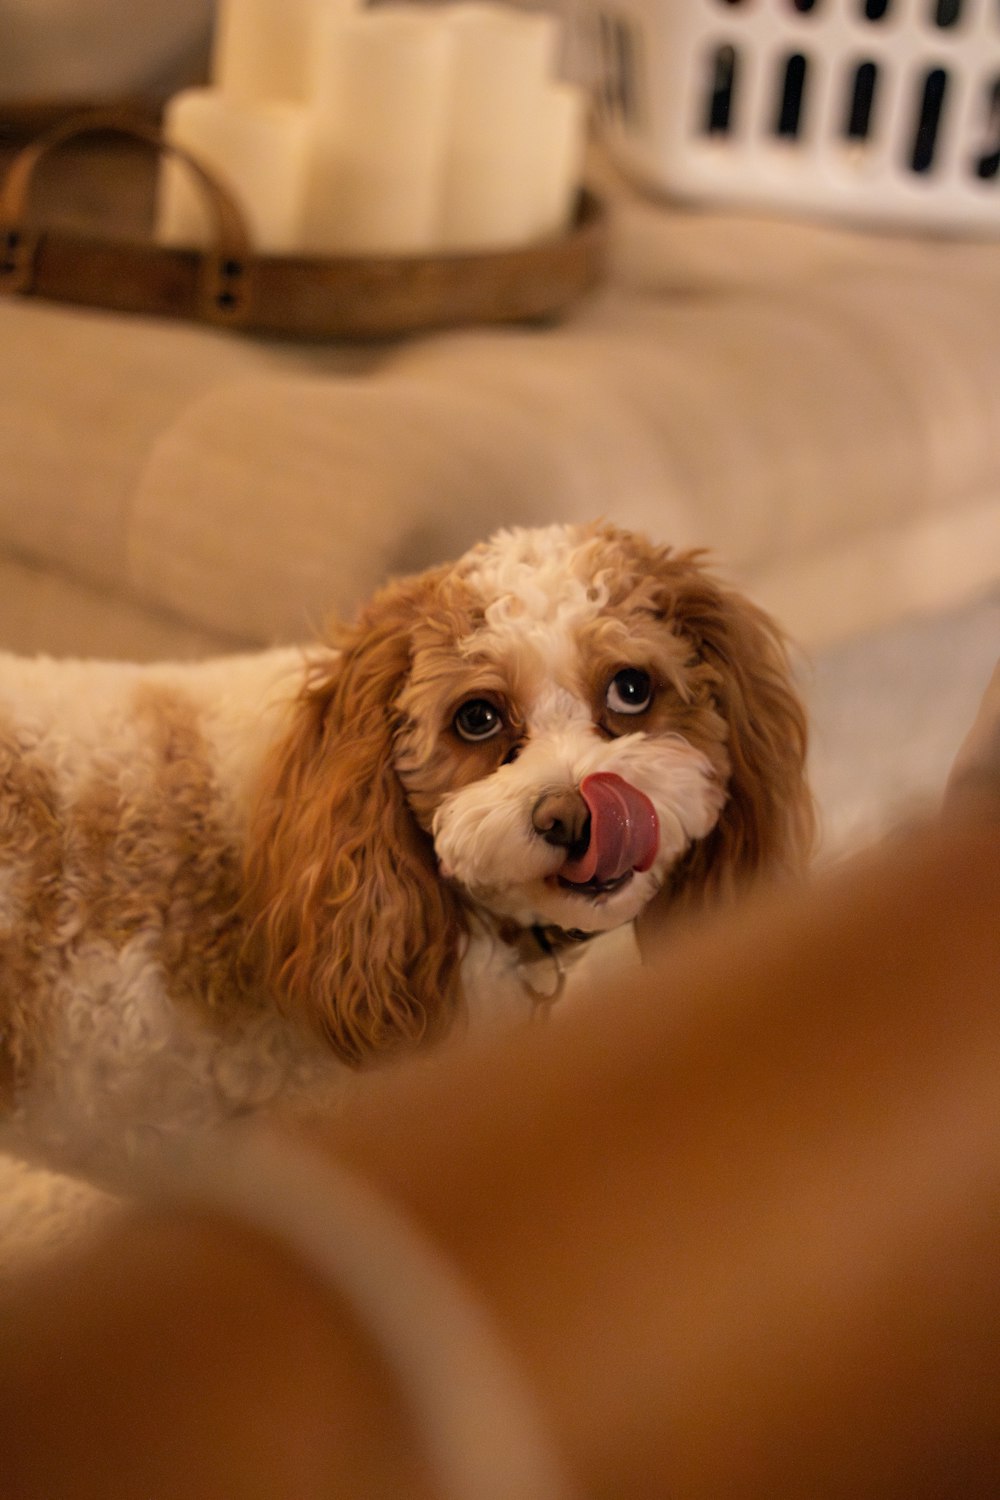 a brown and white dog sticking its tongue out